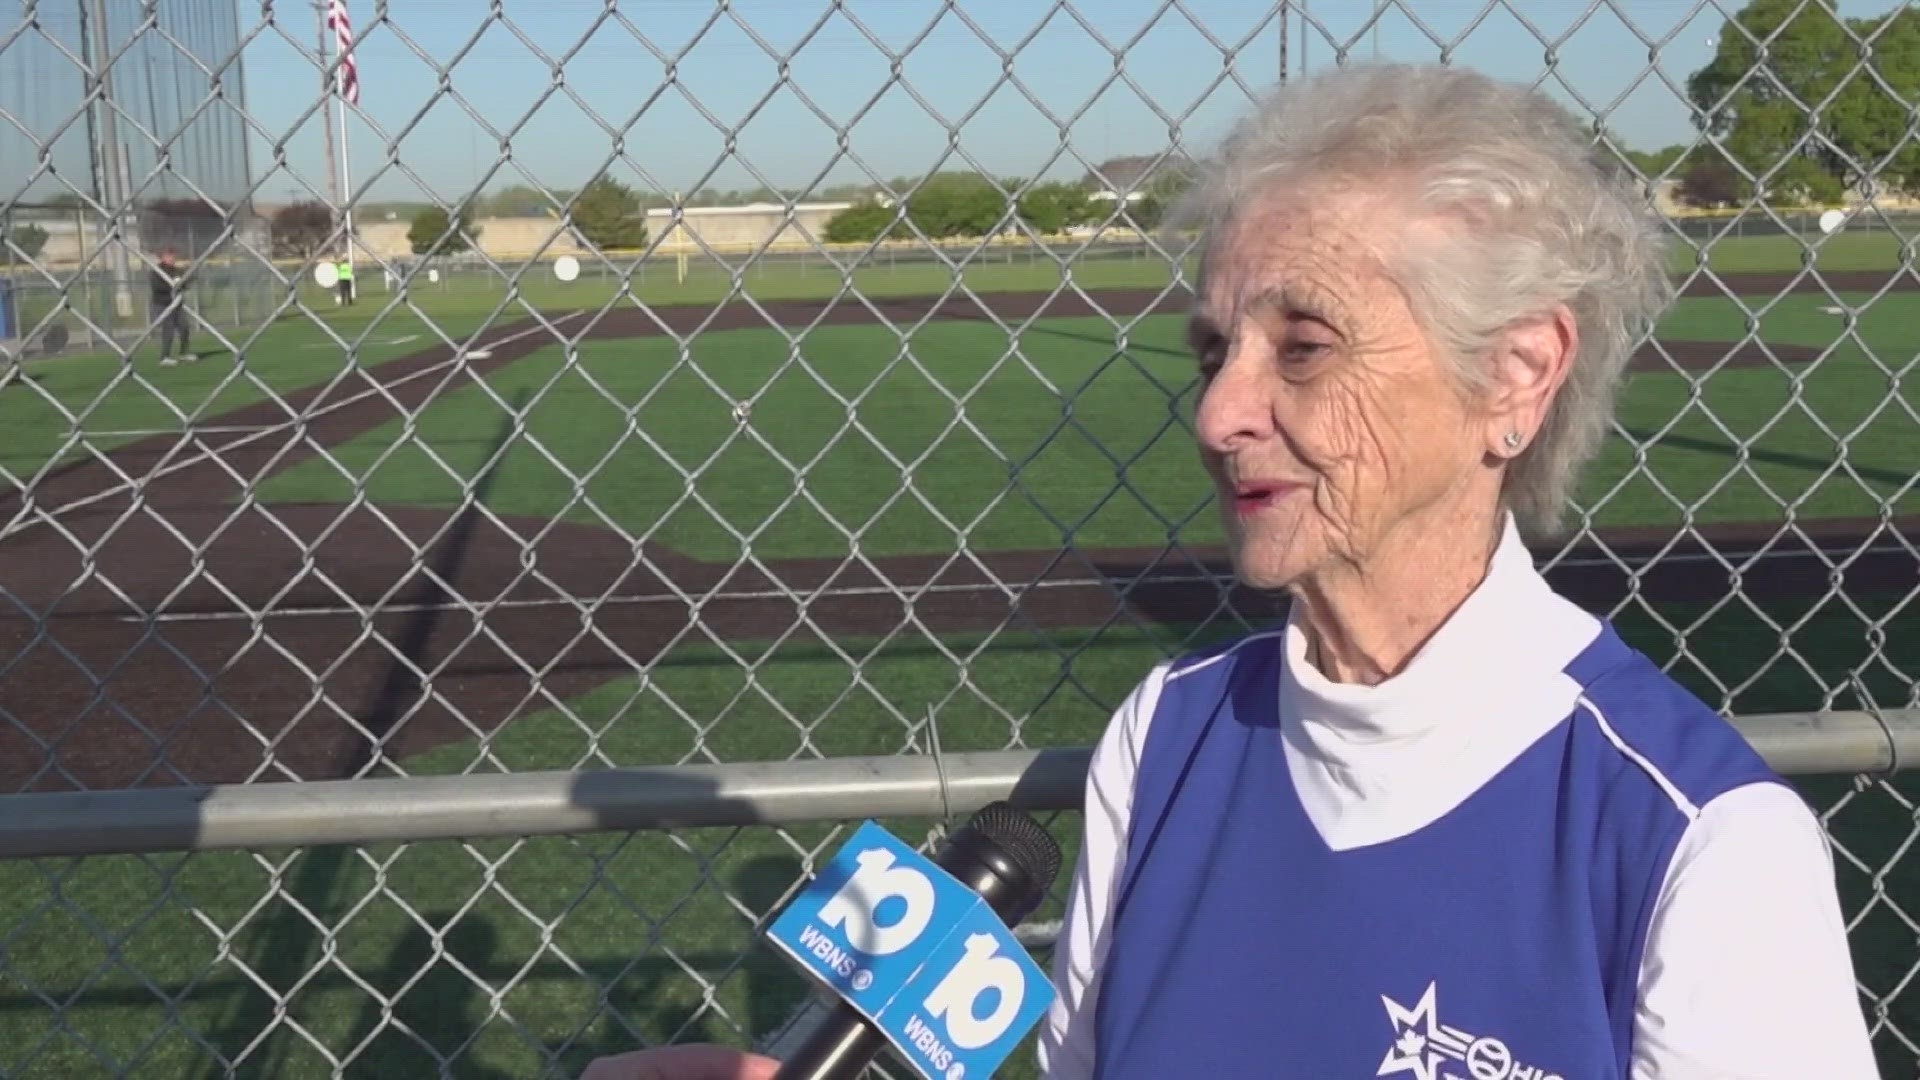 You're never too old to play ball. That's what seniors at the National Senior Softball Games are proving.